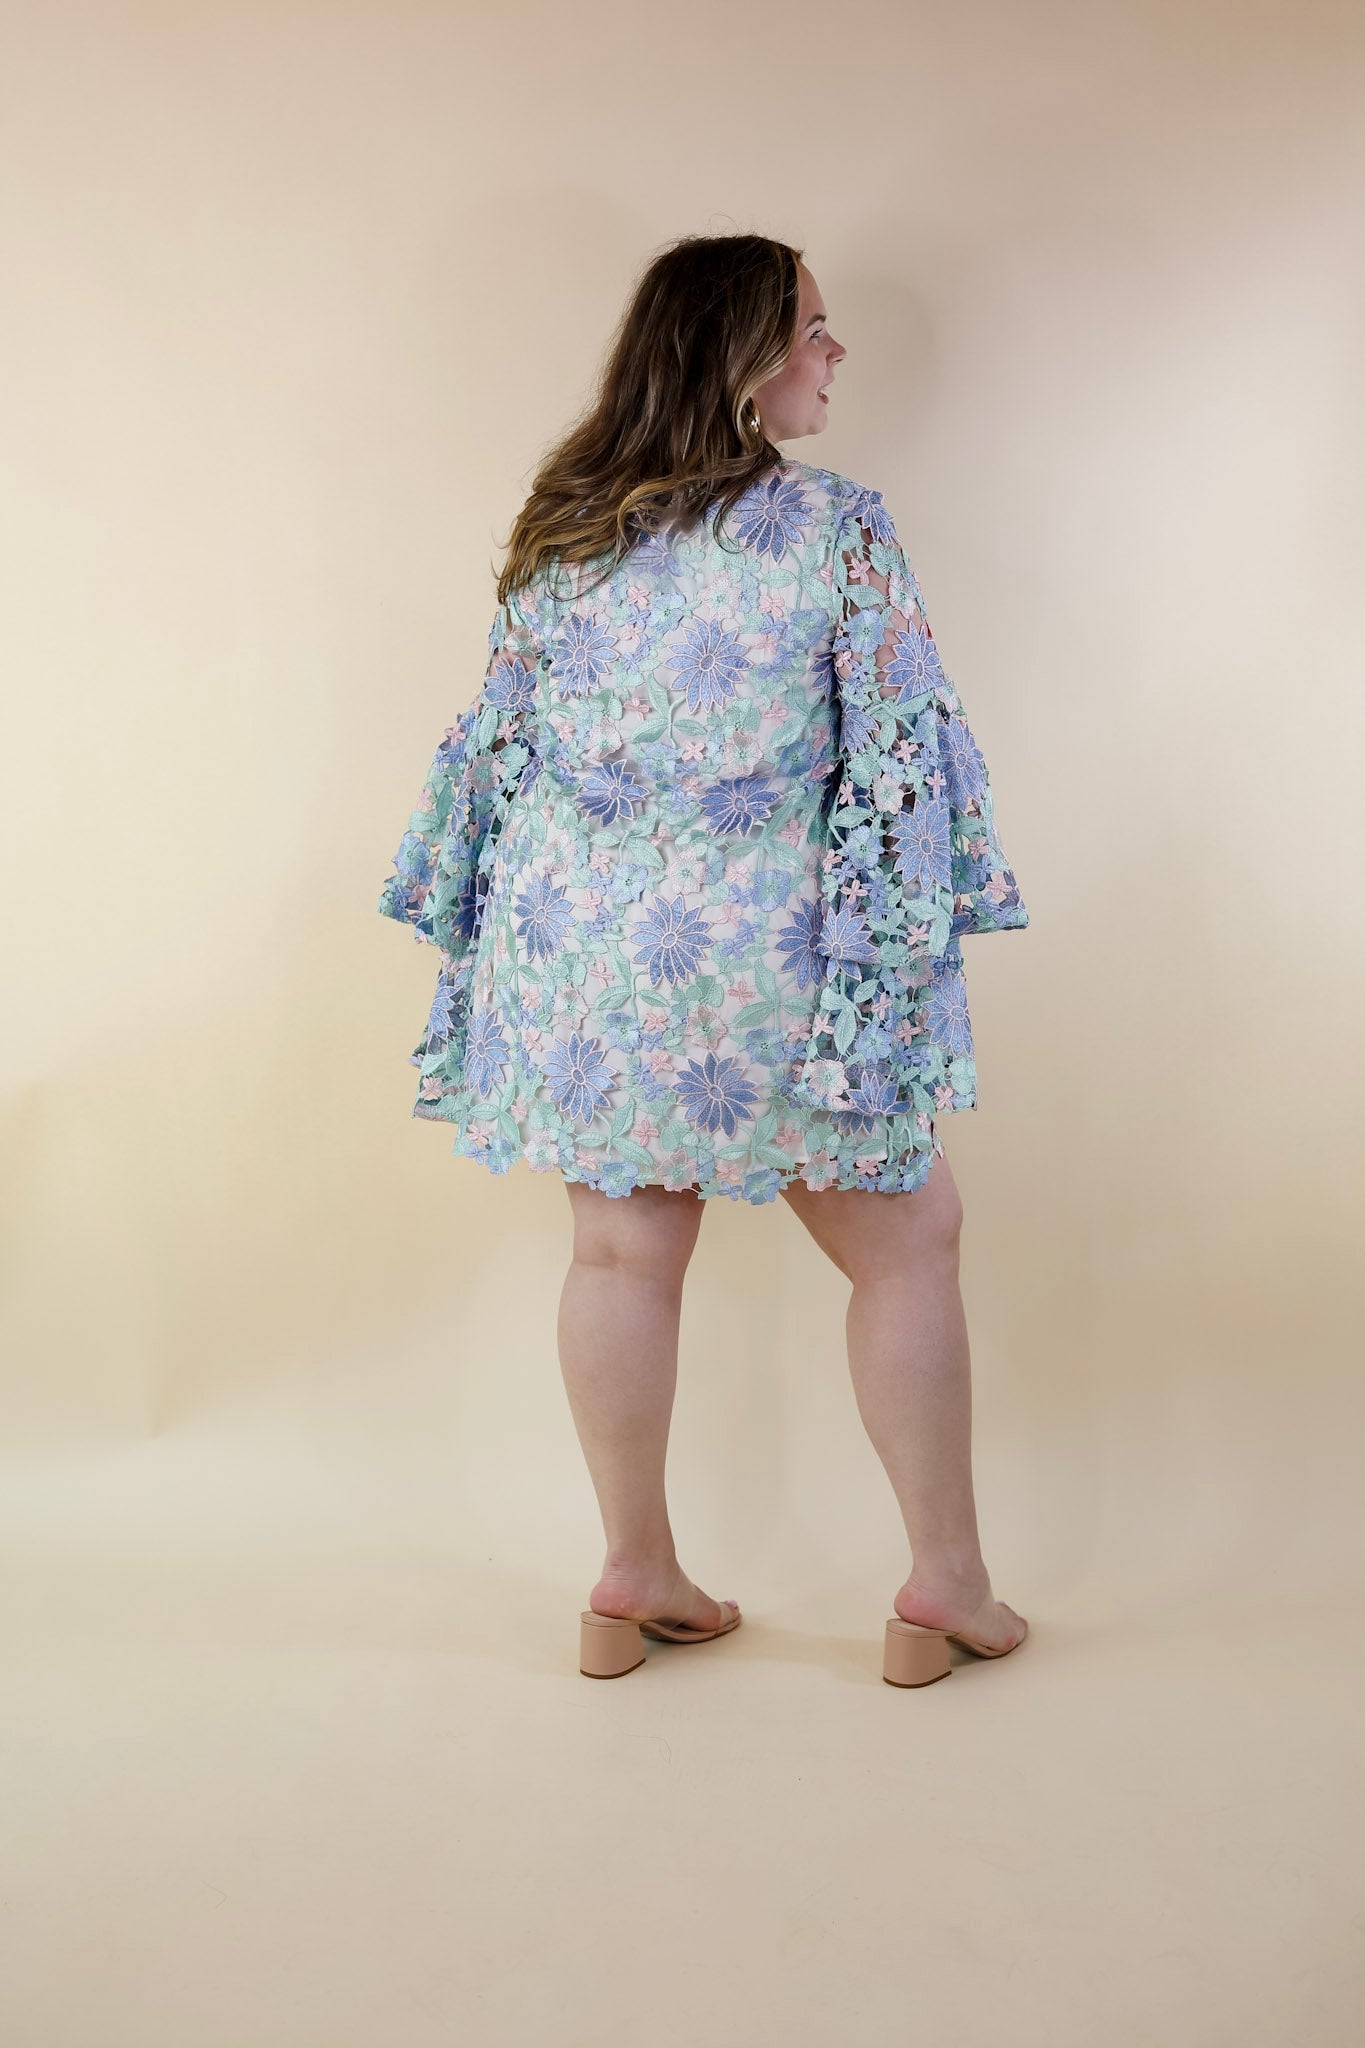 BuddyLove | Gayle Long Sleeve Mini Dress in Bellflower (Blue, Mint Green and Pink) - Giddy Up Glamour Boutique